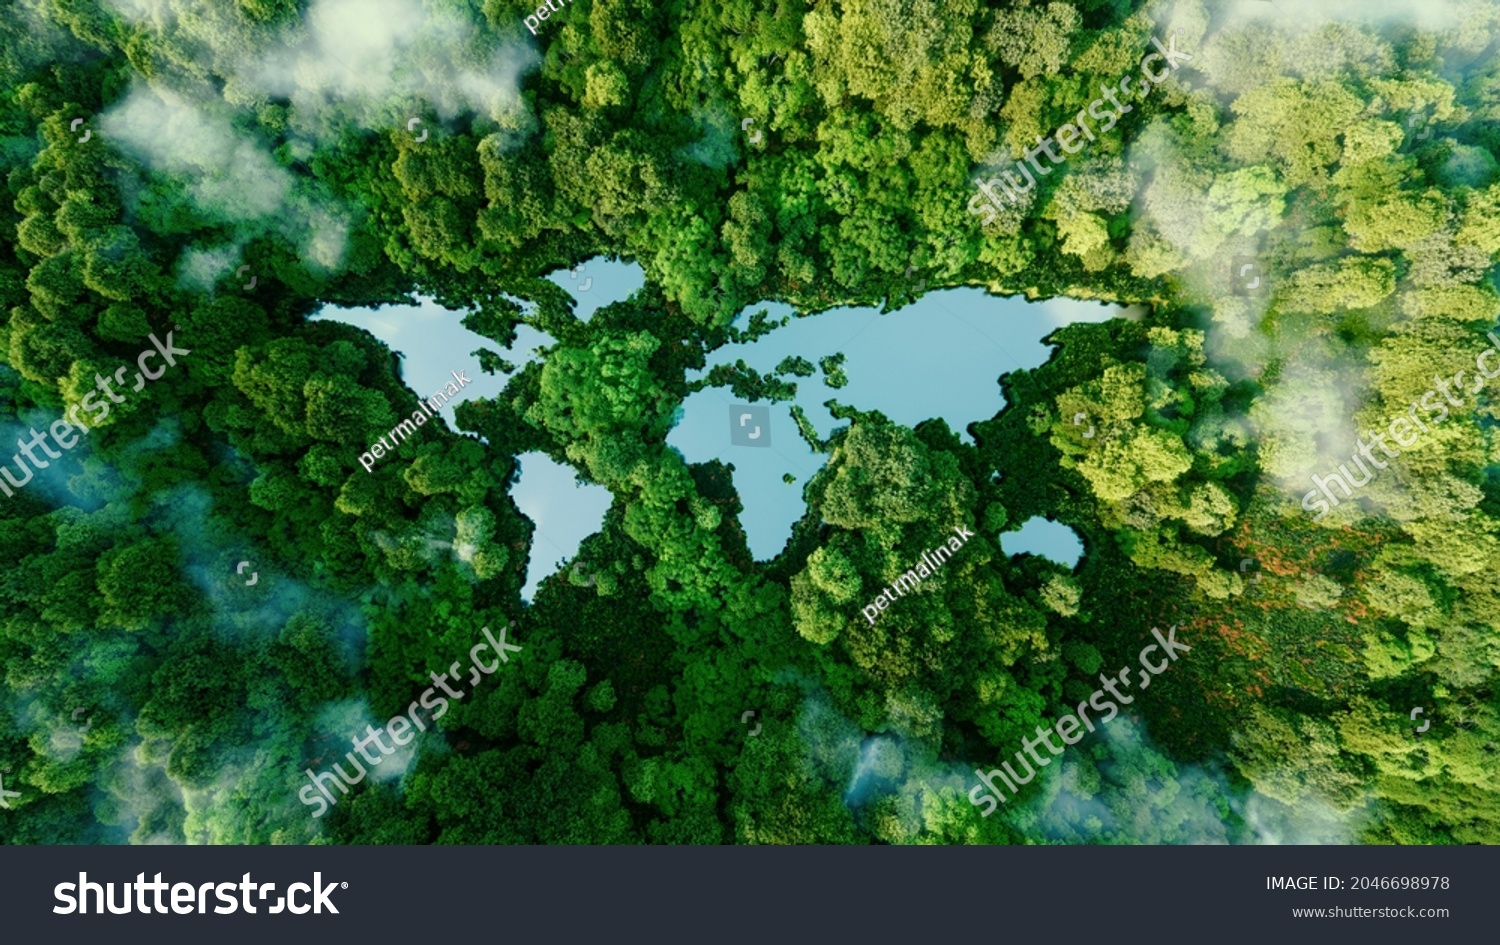 A lake in the shape of the world's continents in the middle of untouched nature. A metaphor for ecological travel, conservation, climate change, global warming and the fragility of nature.3d rendering Stock-illustration